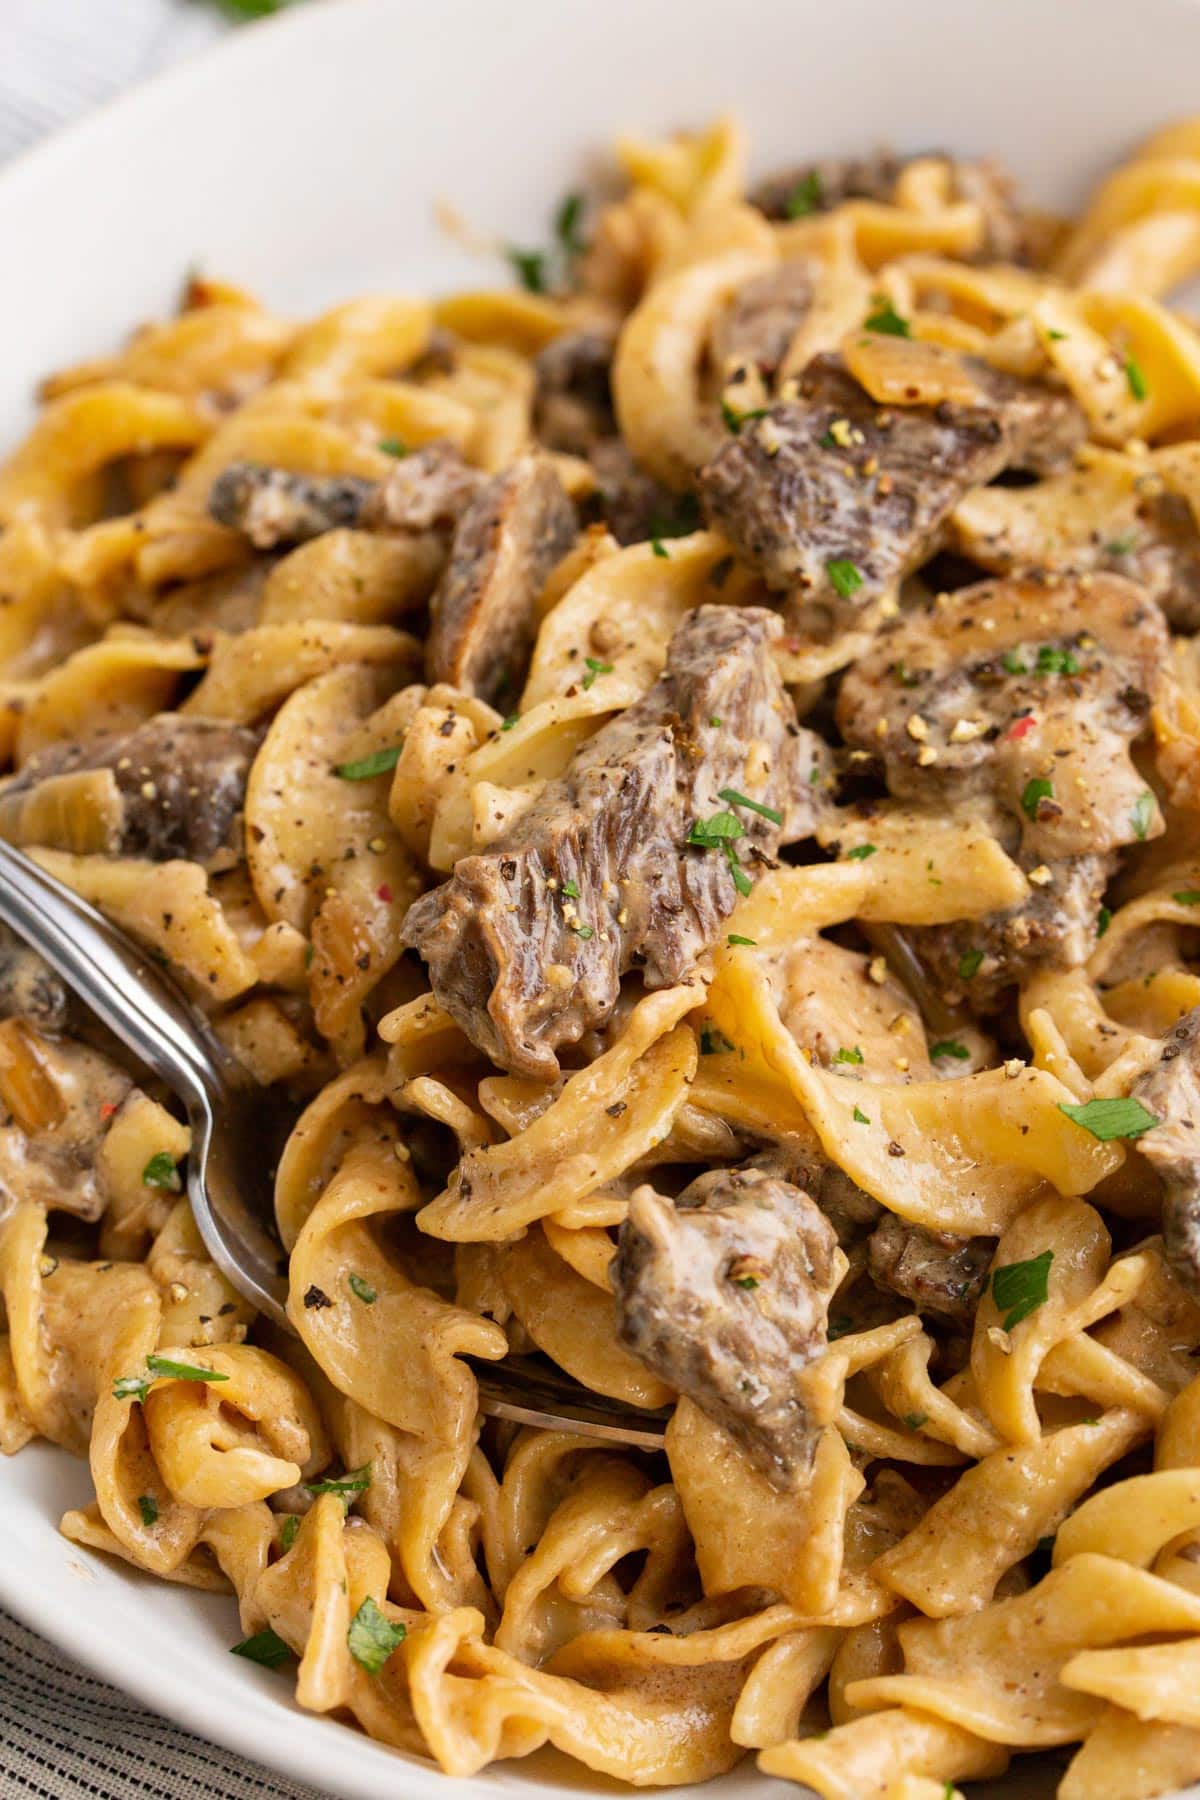 Creamy beef stroganoff on a bed of egg noodles in a white low bowl.